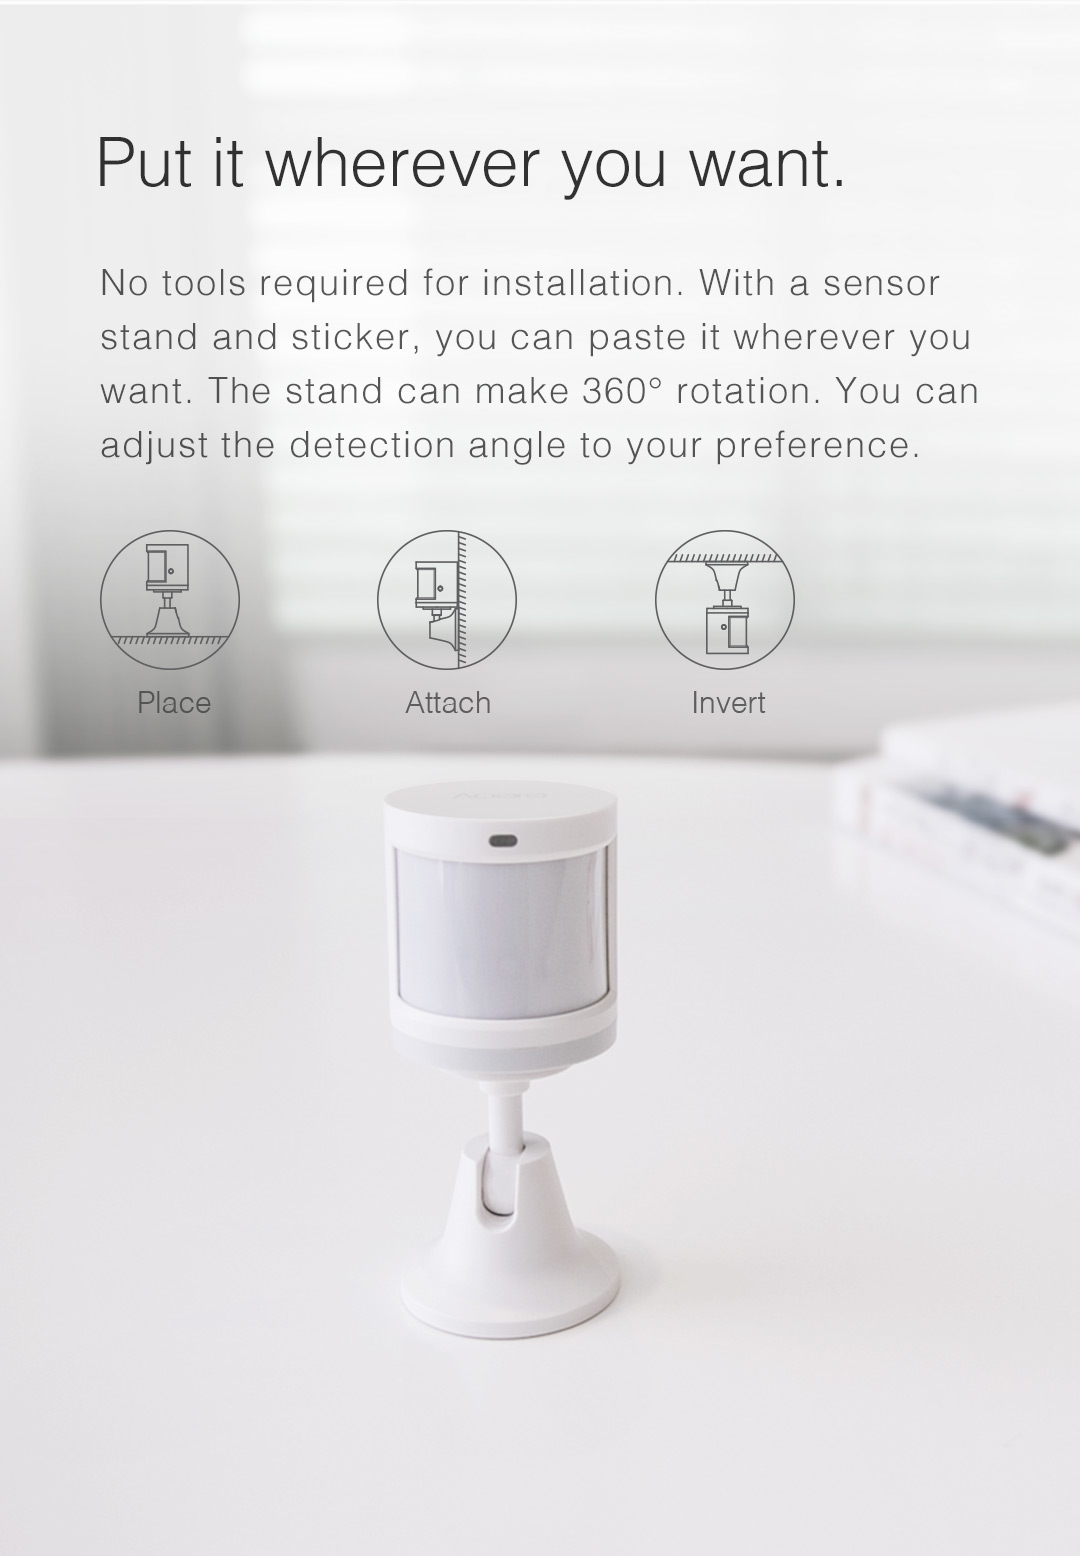 Indoor smart motion sensor with stand and sticker that you can put it anywhere